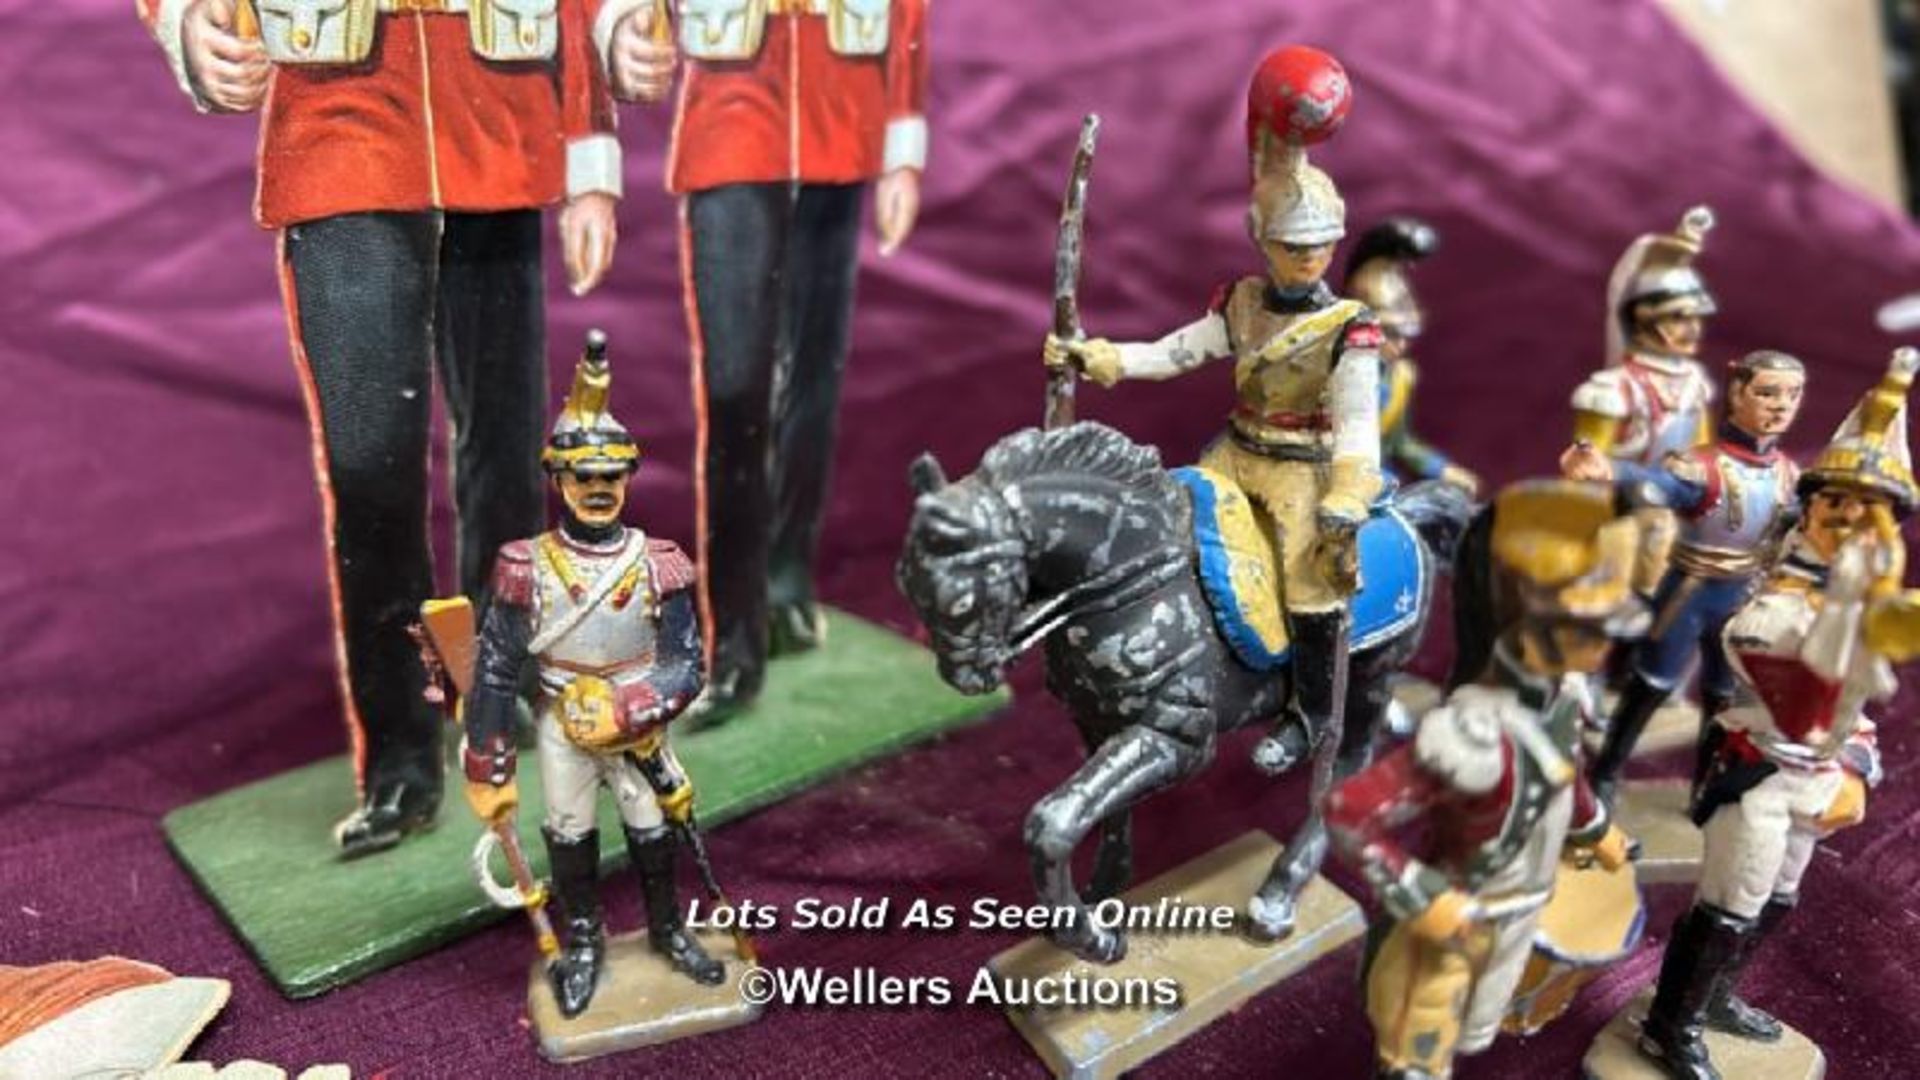 COLLECTION OF 19TH CENTURY PAPER DECOUPAGE SOLDIERS AND SEVEN FRENCH DRAGOON LEAD SOLDIERS - Image 5 of 6